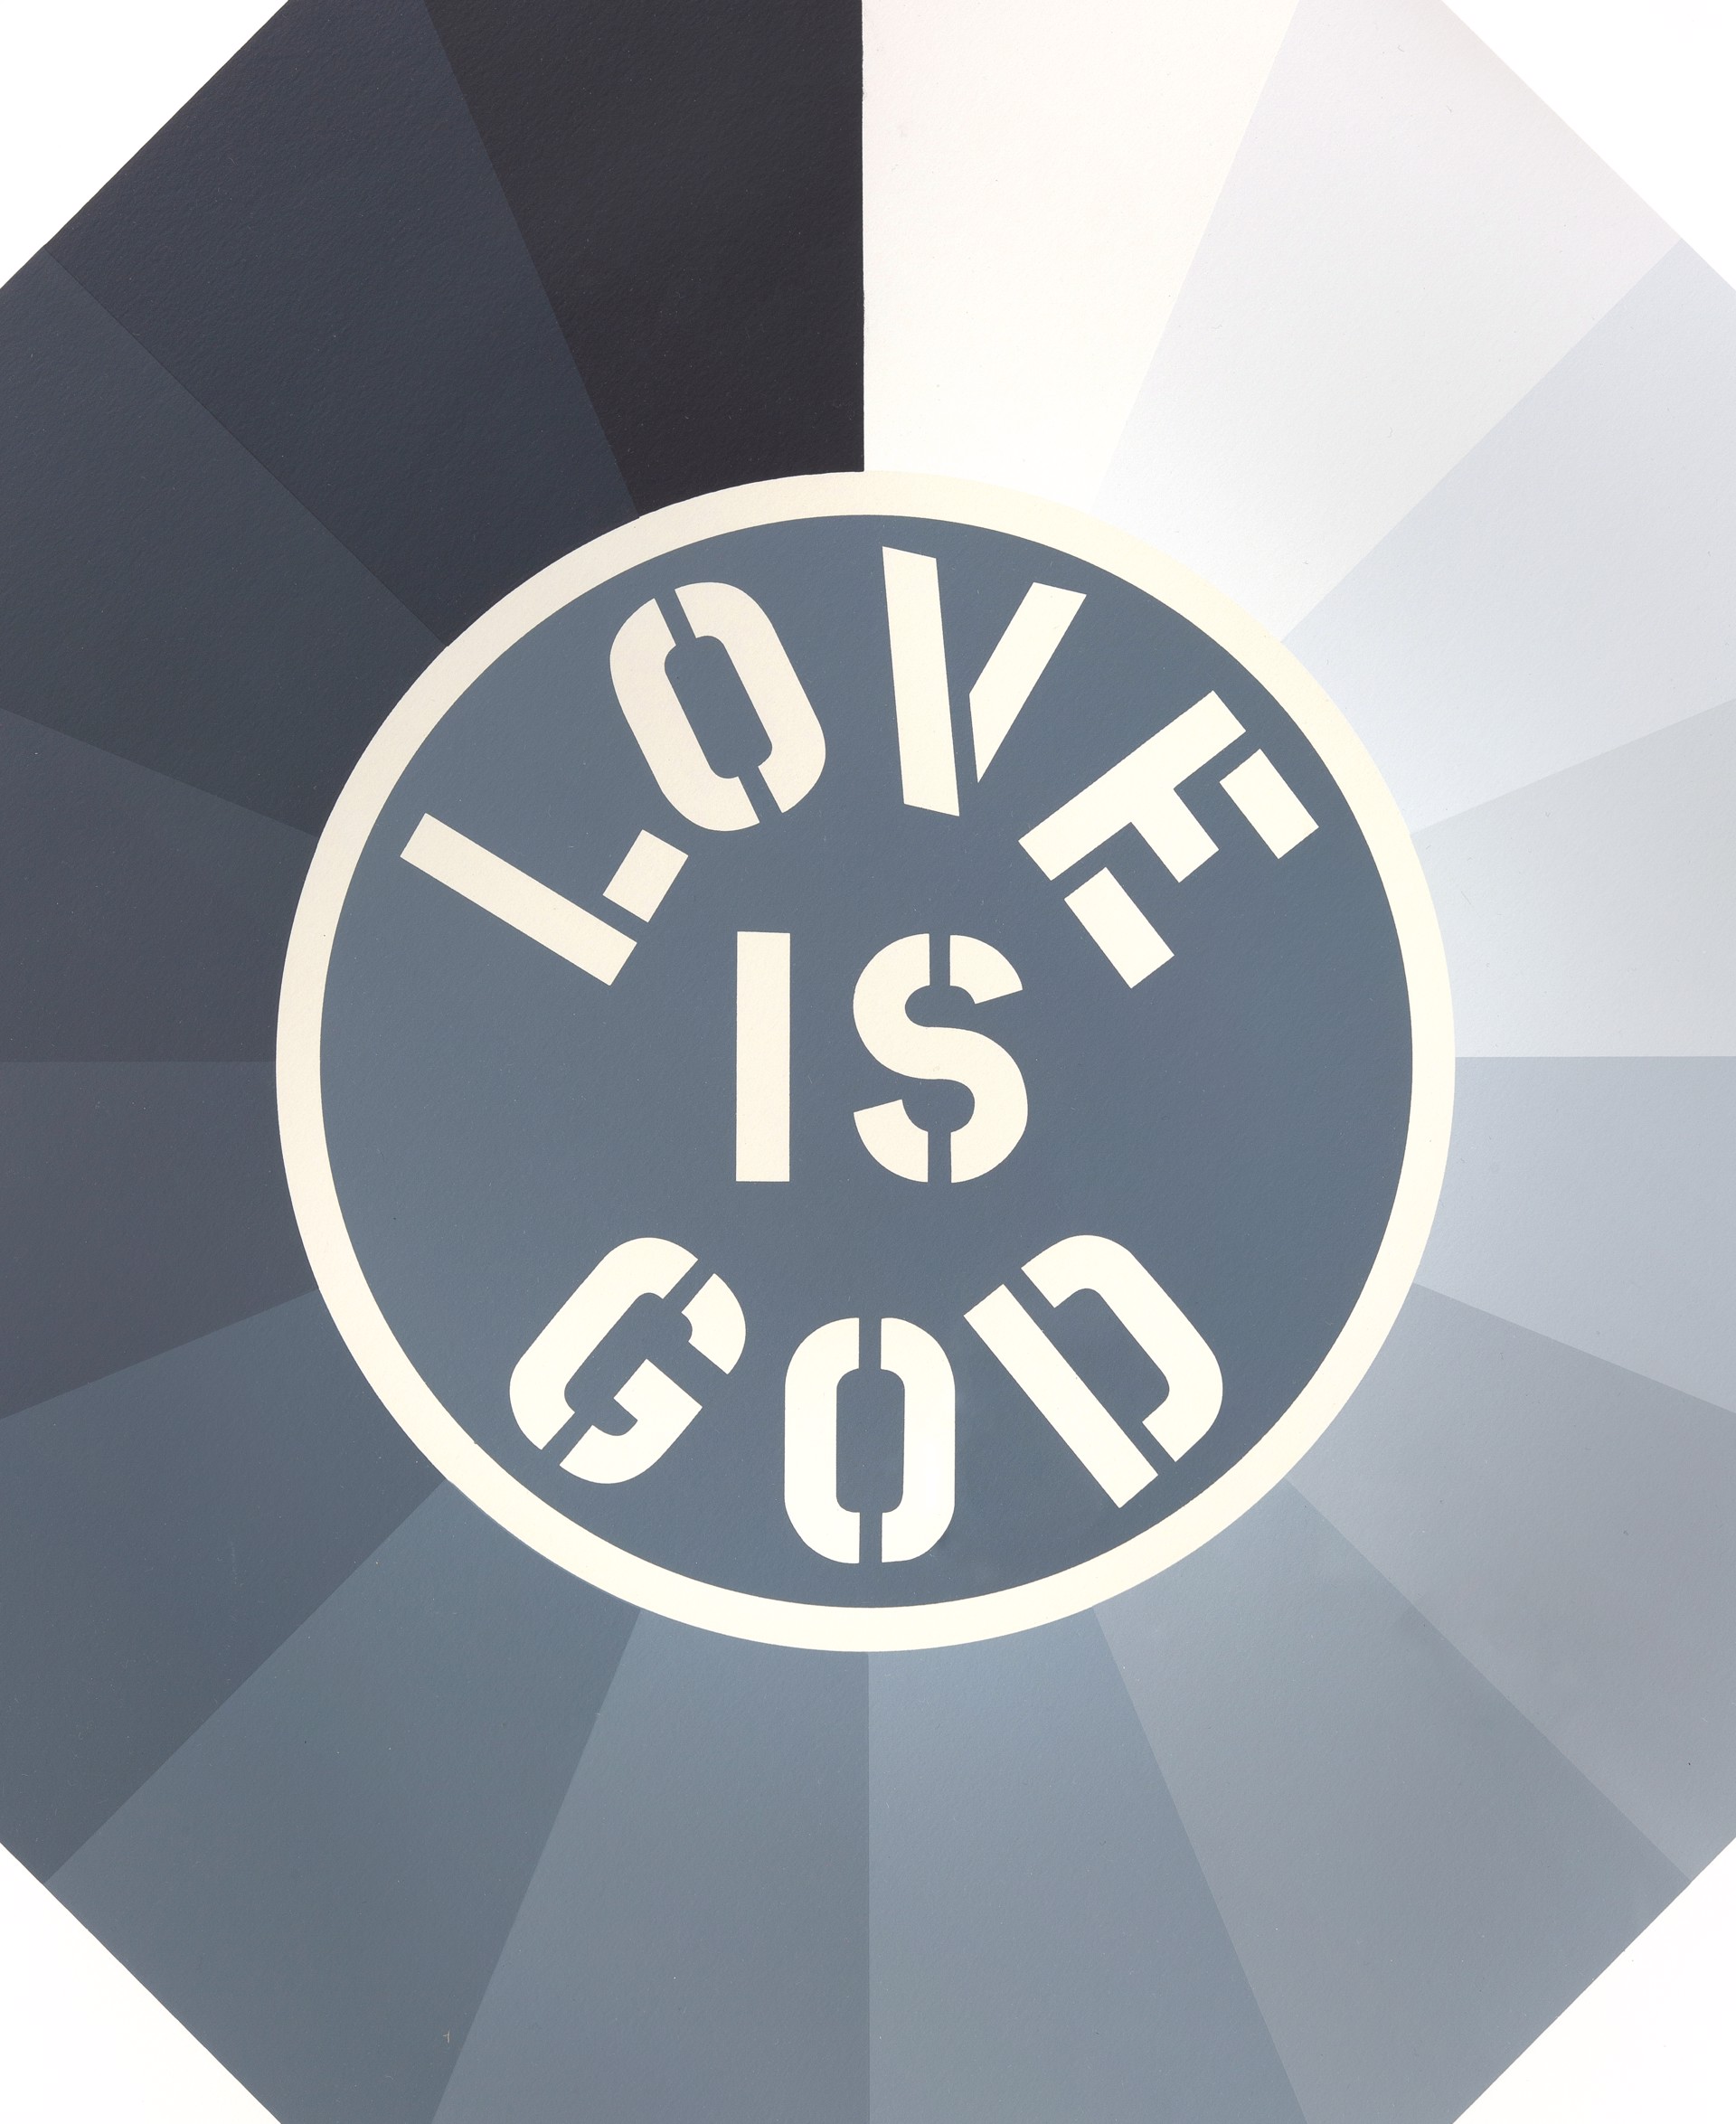 Love Is God by Robert Indiana